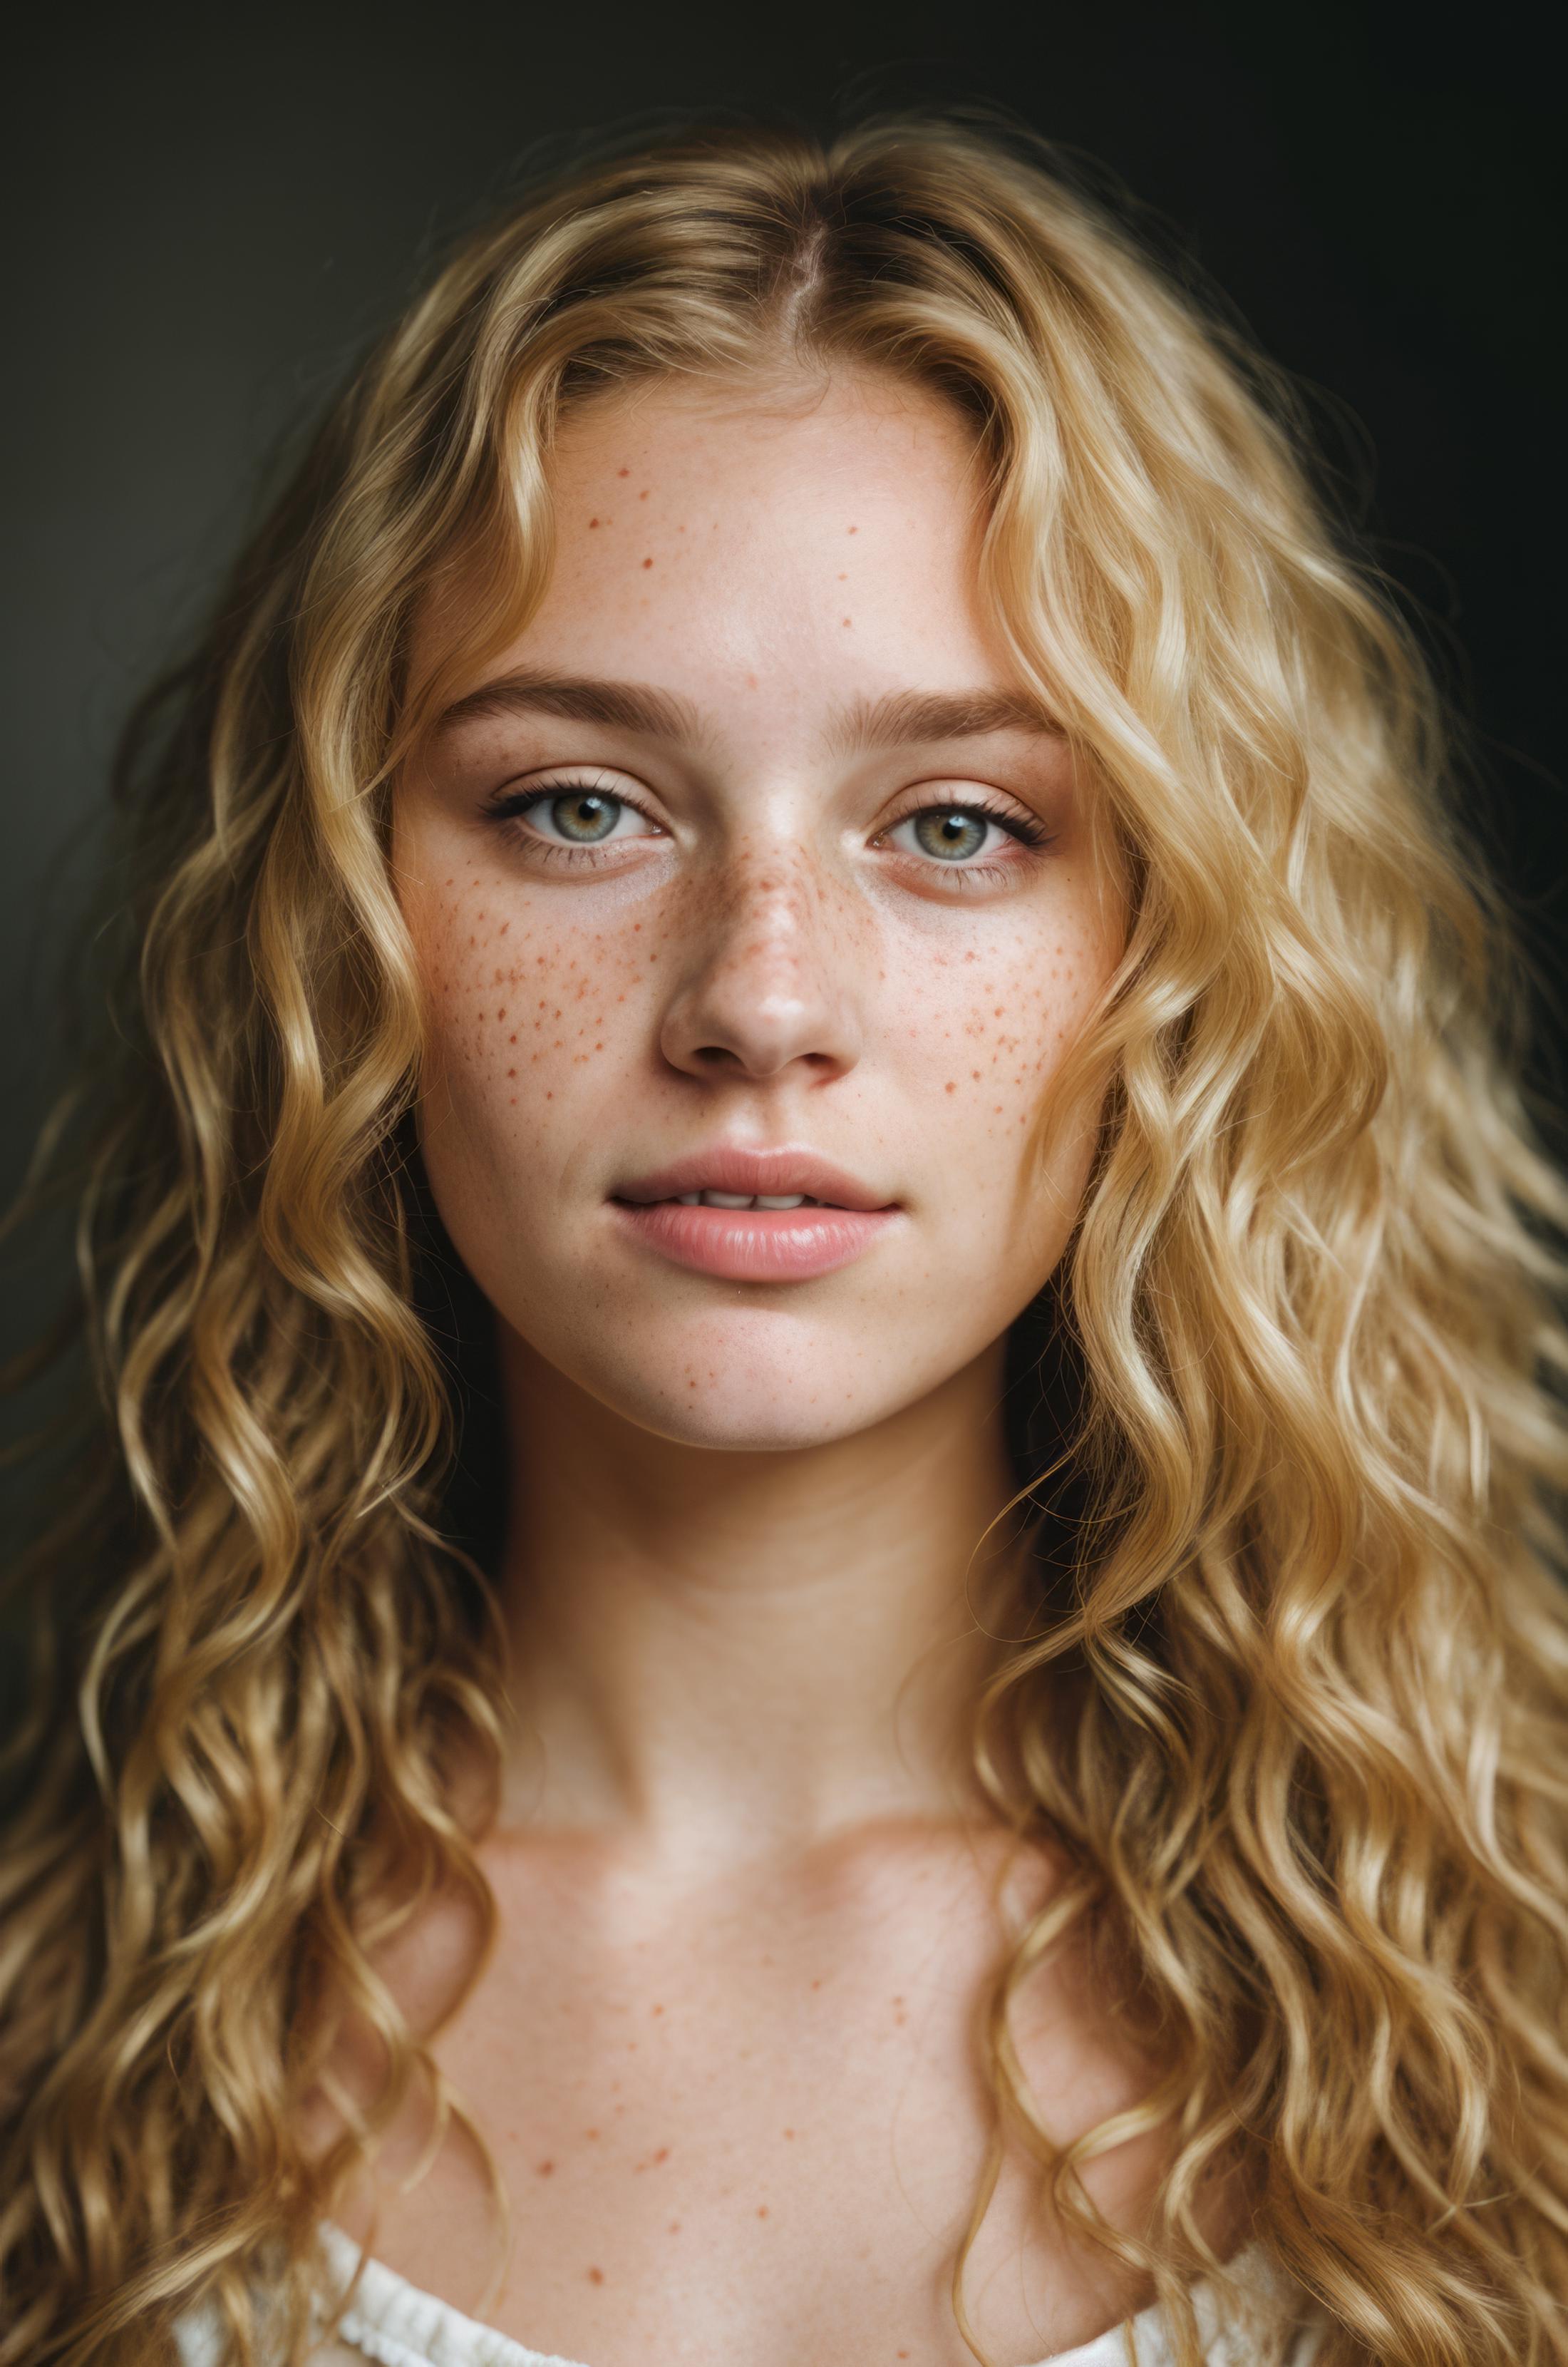 A woman with blonde curly hair and freckles on her face.